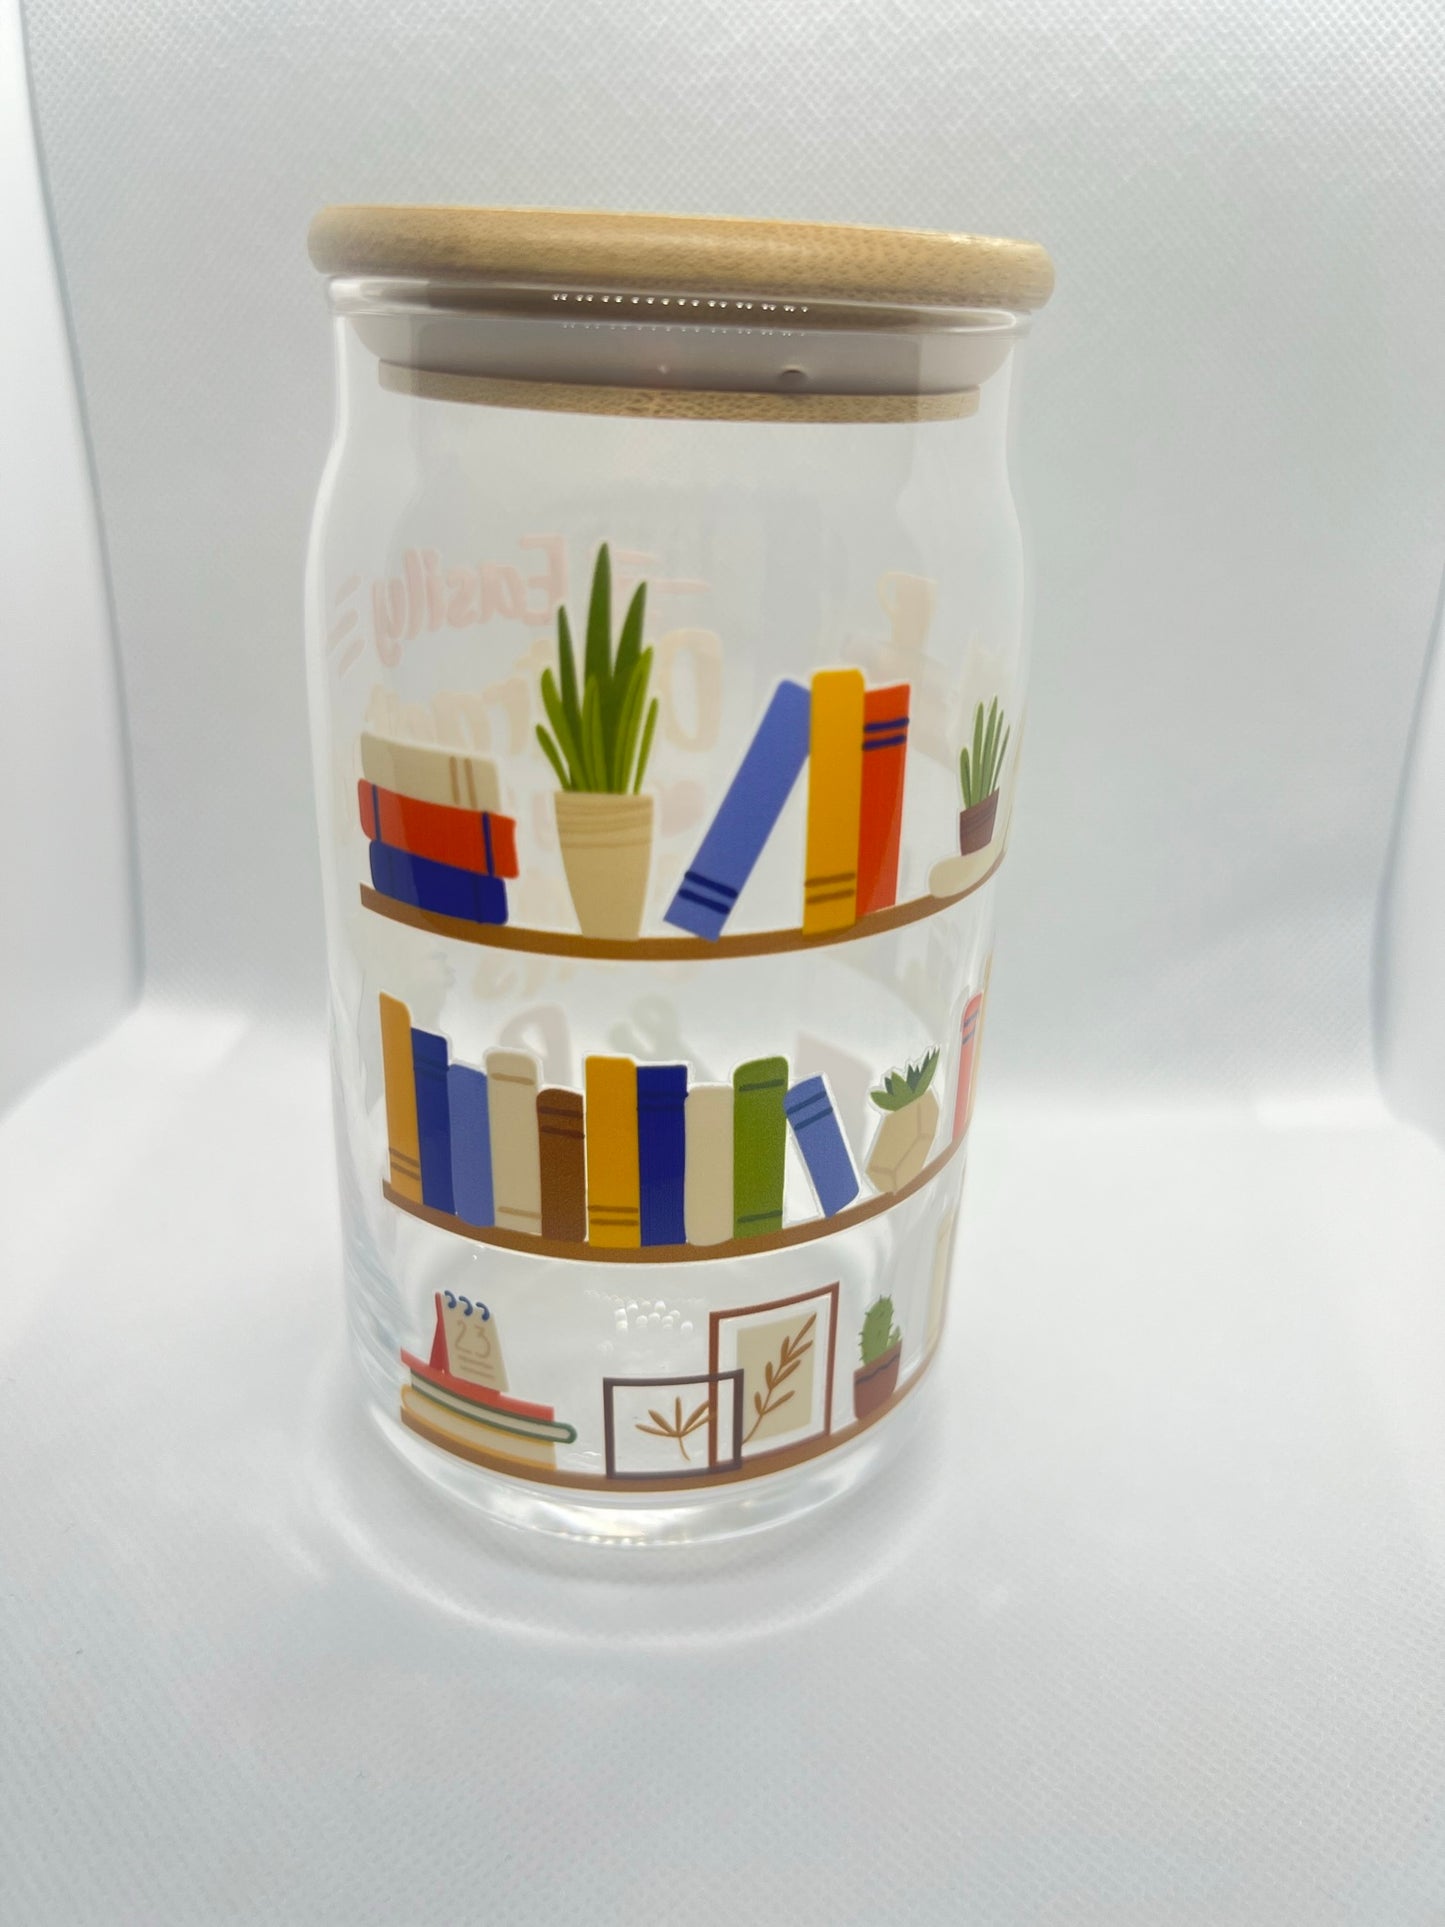 Easily Distracted By Cats & Books 16oz Glass Can Cup